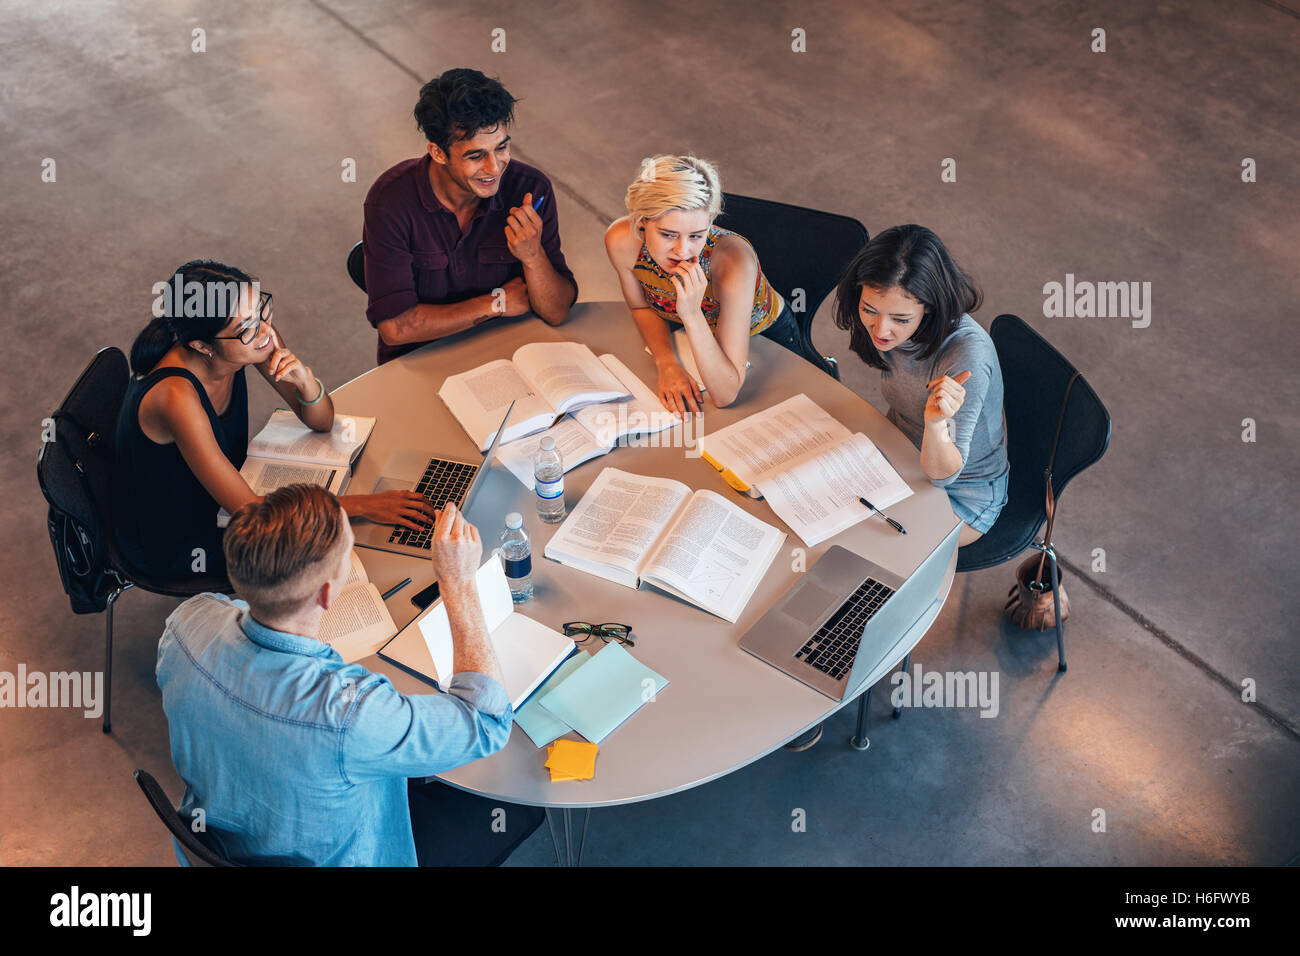 Group of young people studying together. Young students in cooperation with their academic assignment. Stock Photo